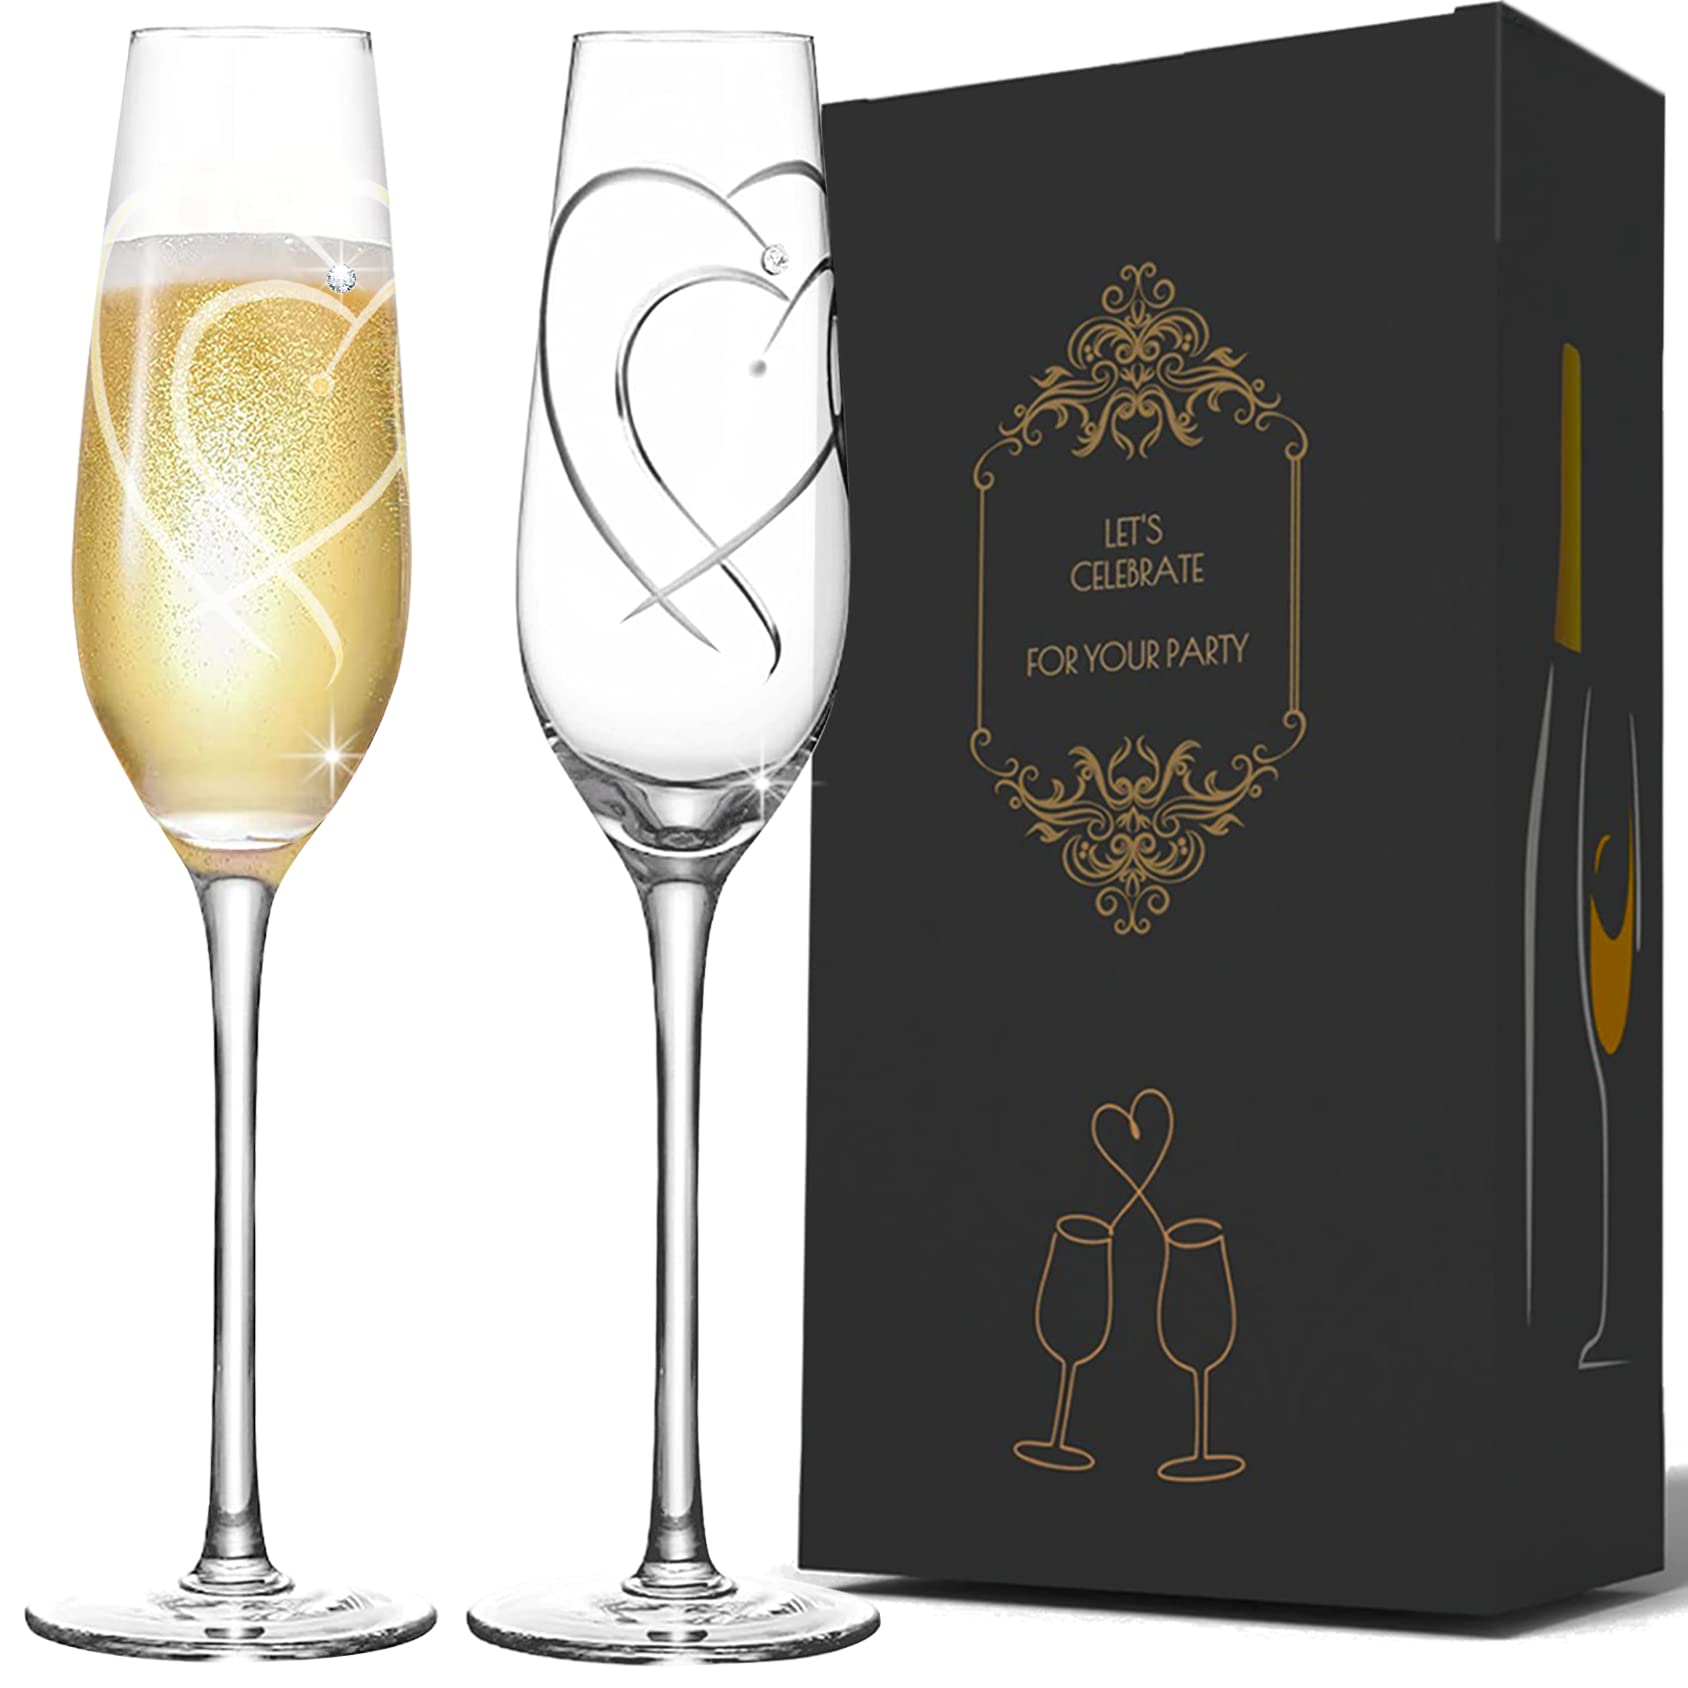 VARLKA Champagne Flutes set of 2, Bride and Groom Wedding Toasting Champagne Glasses with Love Heart Decorated with Real Crystals, Wine Glasses, Wedding Gifts for Couple Engagement gifts